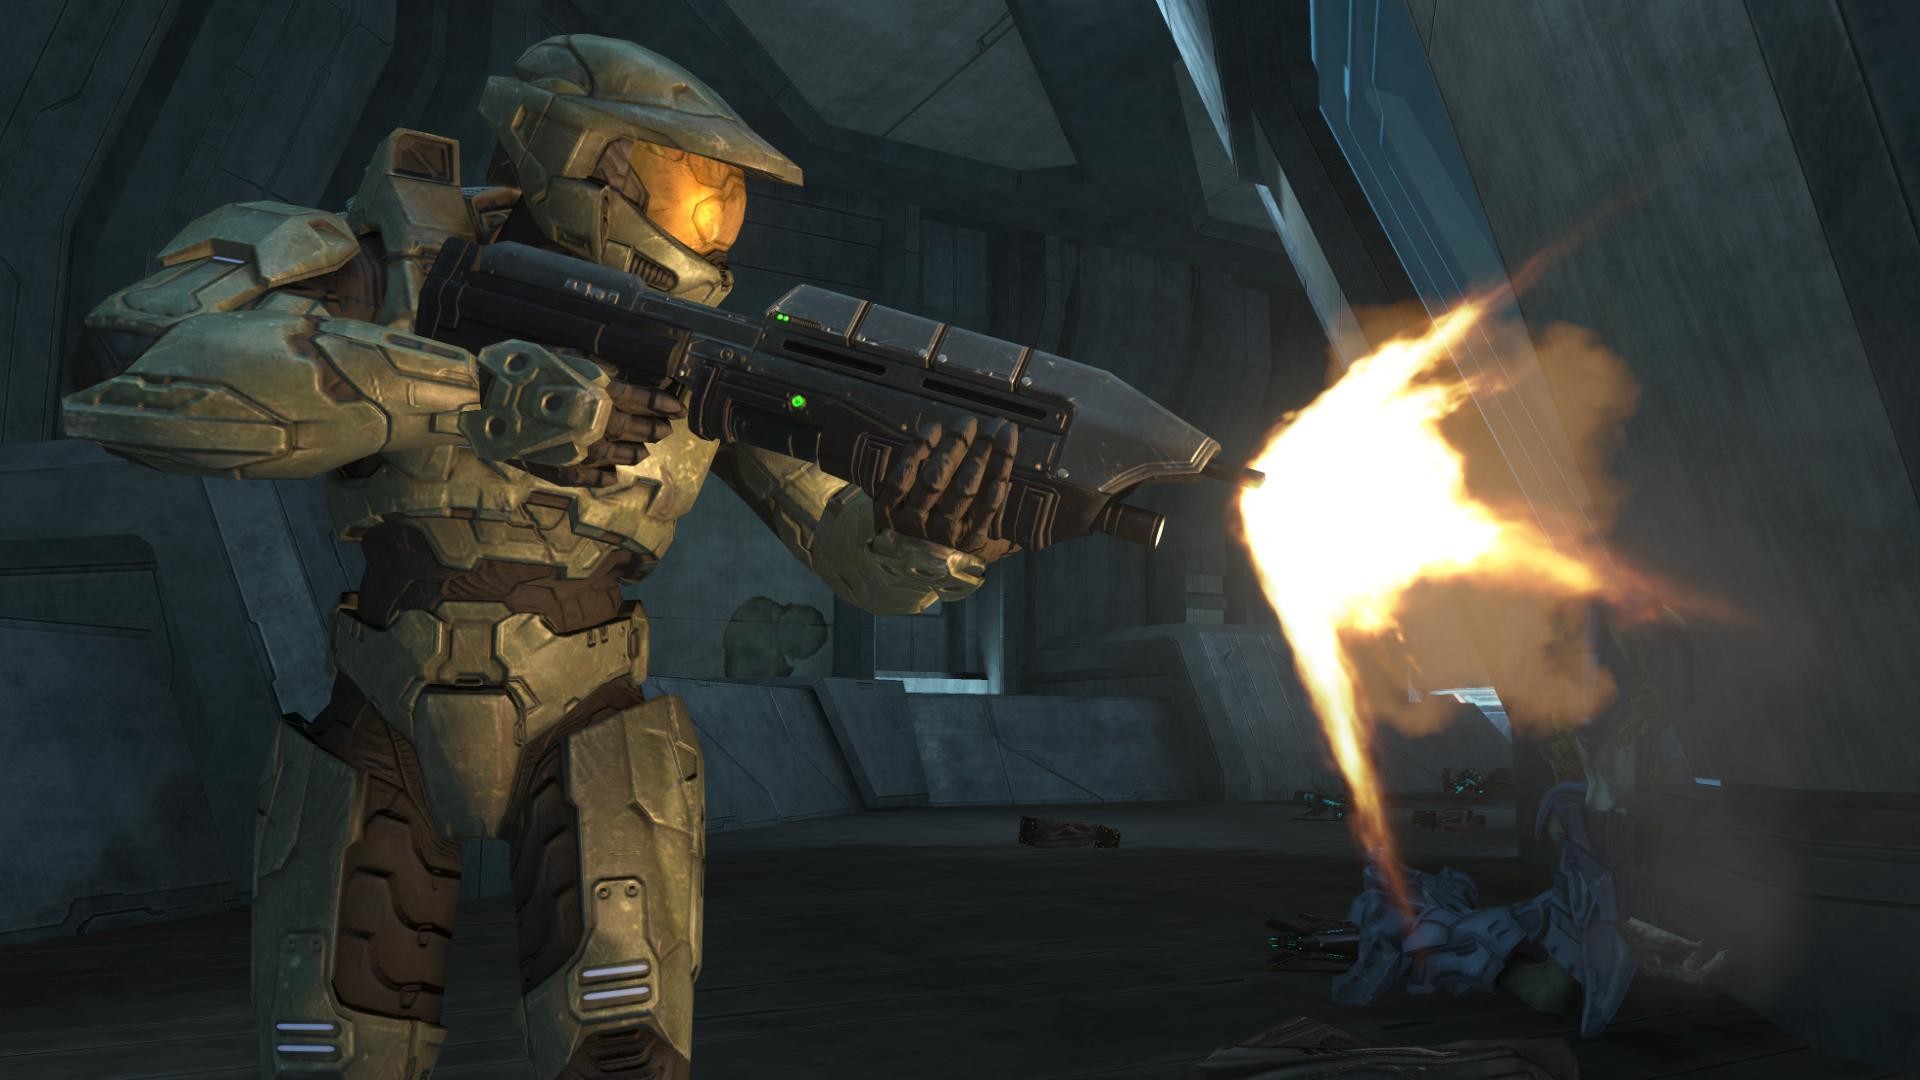 1920x1080 158 best halo images on Pinterest | Videogames, Halo reach and Master chief